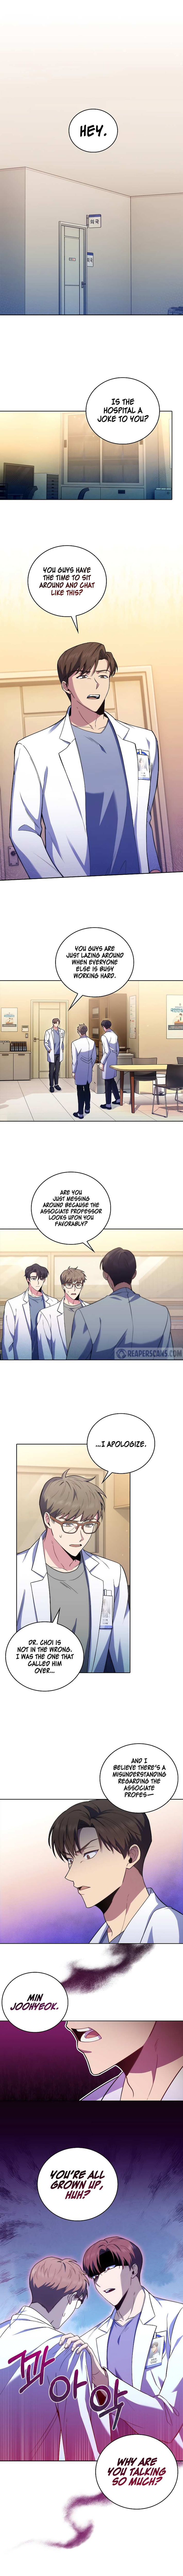 Level-Up Doctor (Manhwa) - Page 1